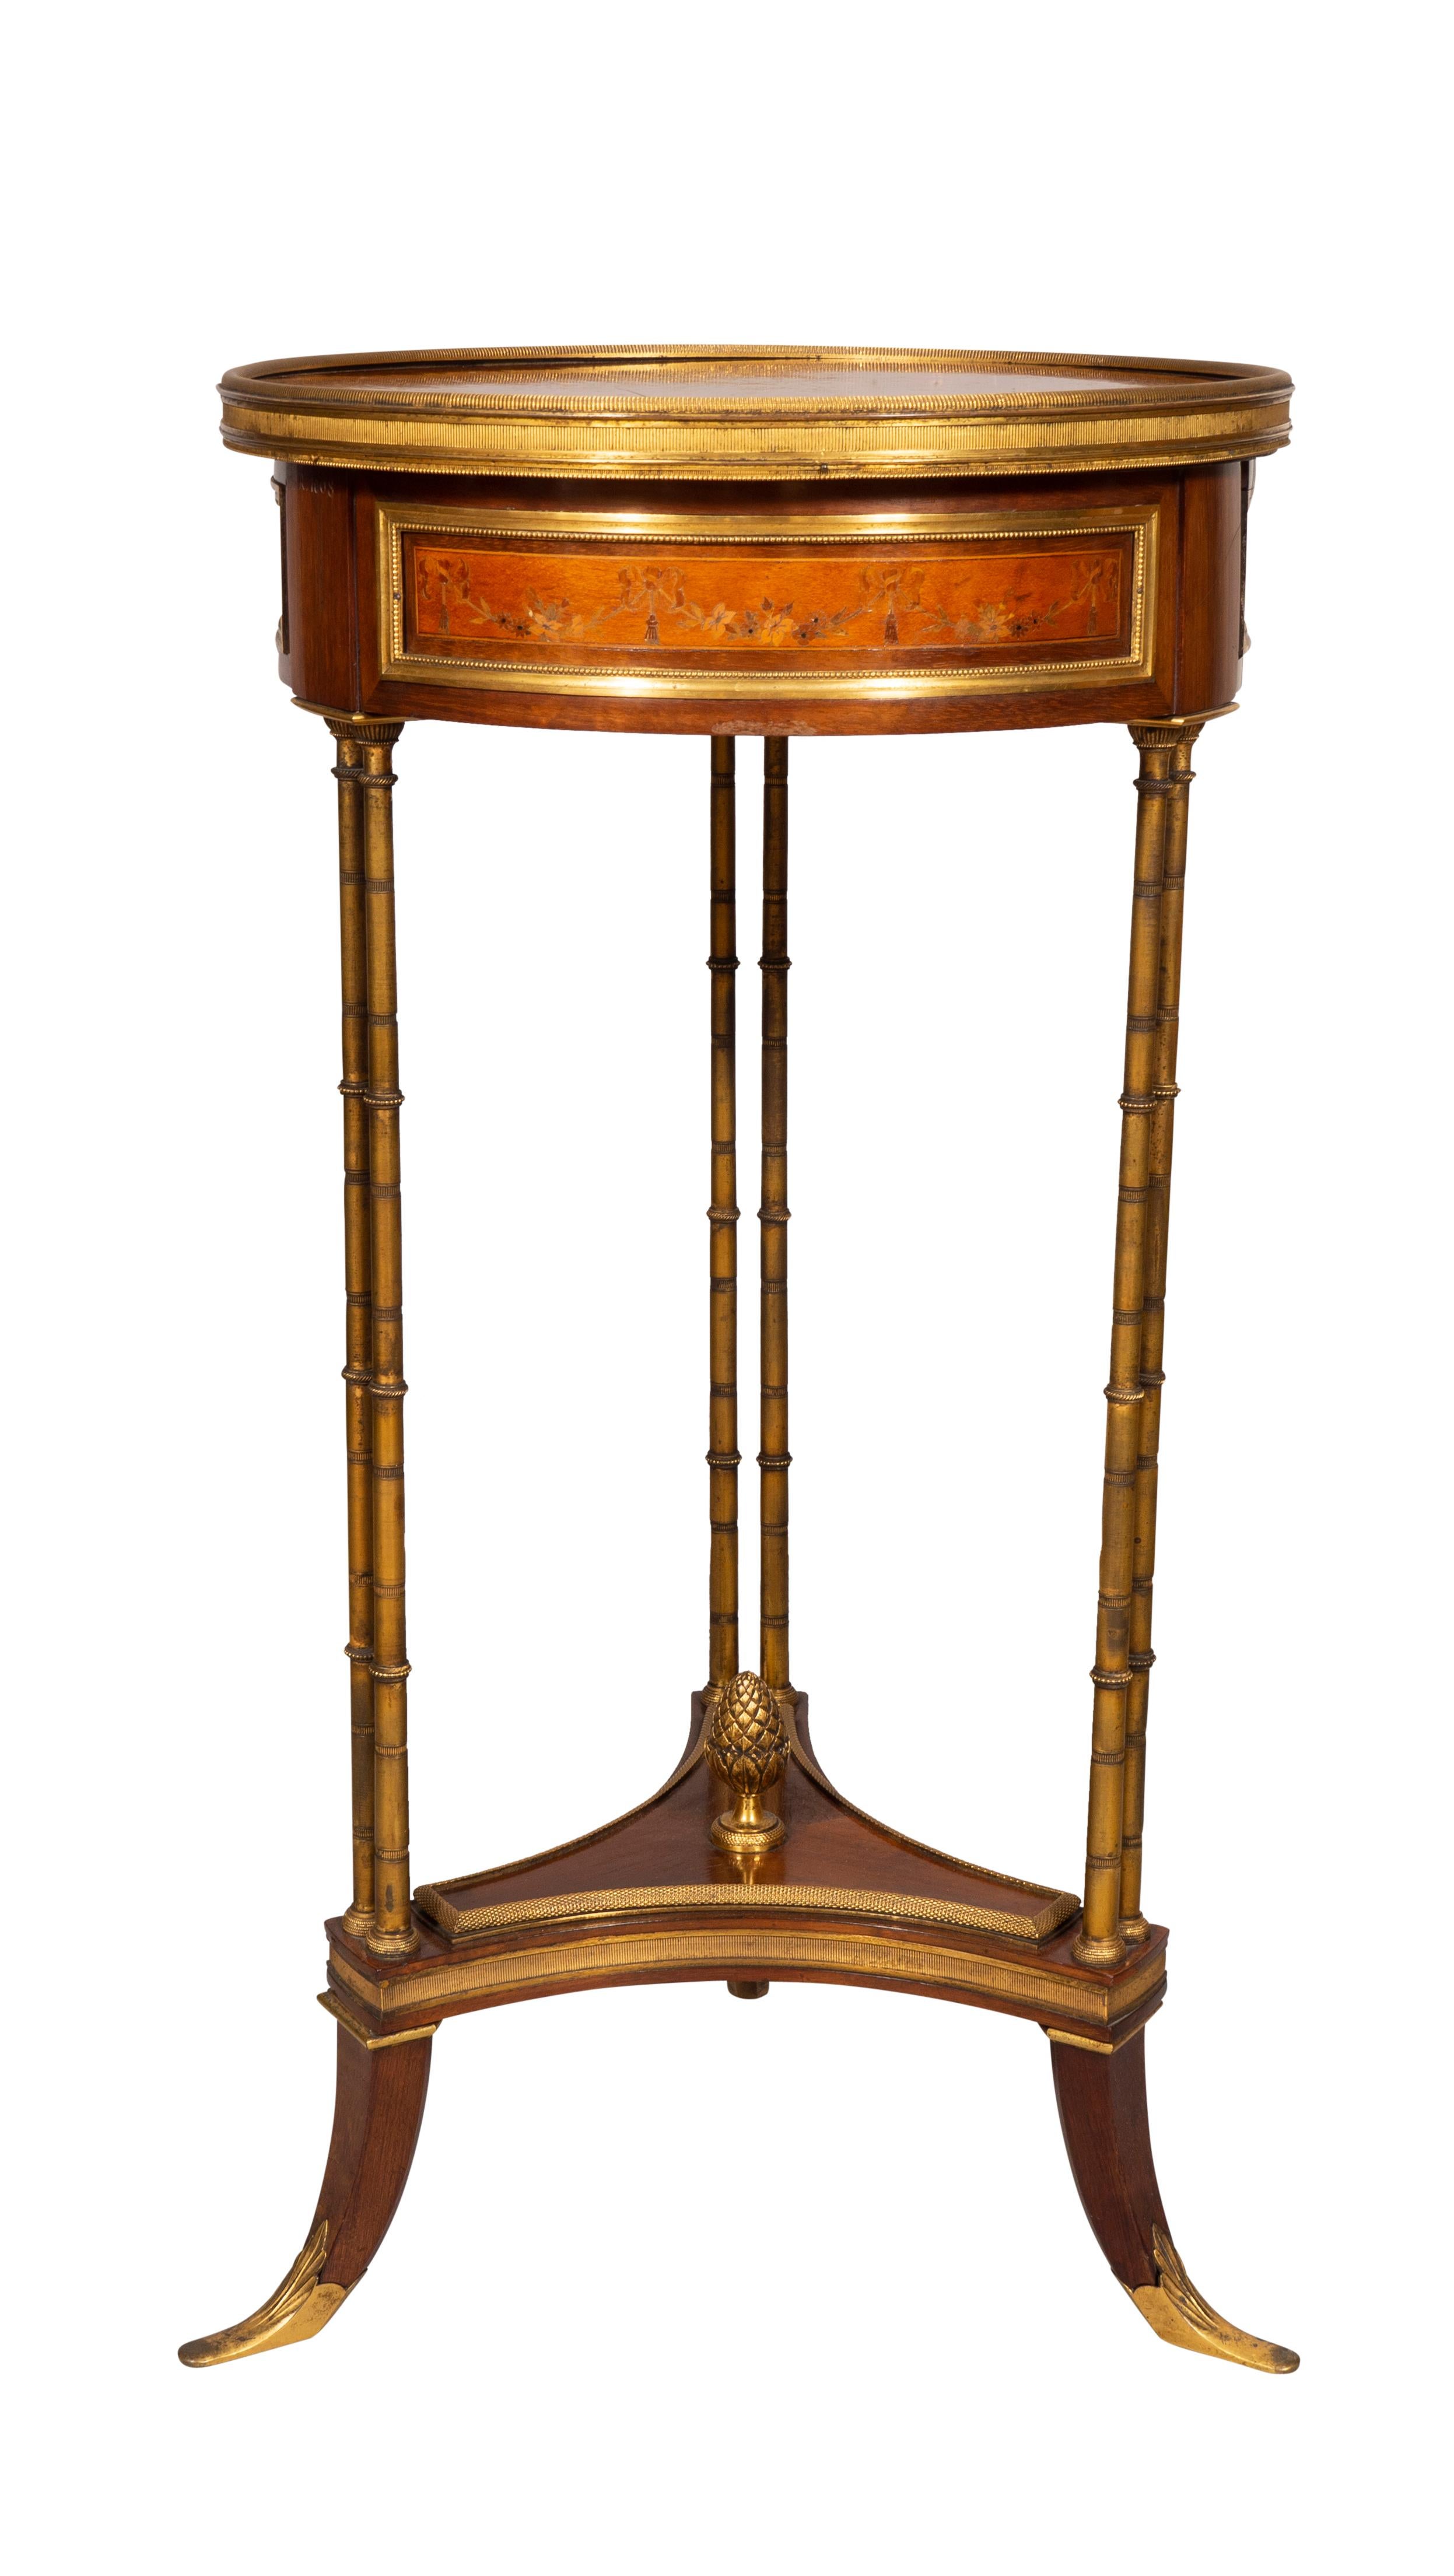 Circular top with central floral spray and rosewood banding and bronze edge, the frieze with a drawer with hidden button to open. The whole frieze with floral inlays, raised on bronze cluster legs joining a mahogany stretcher with bronze finial,